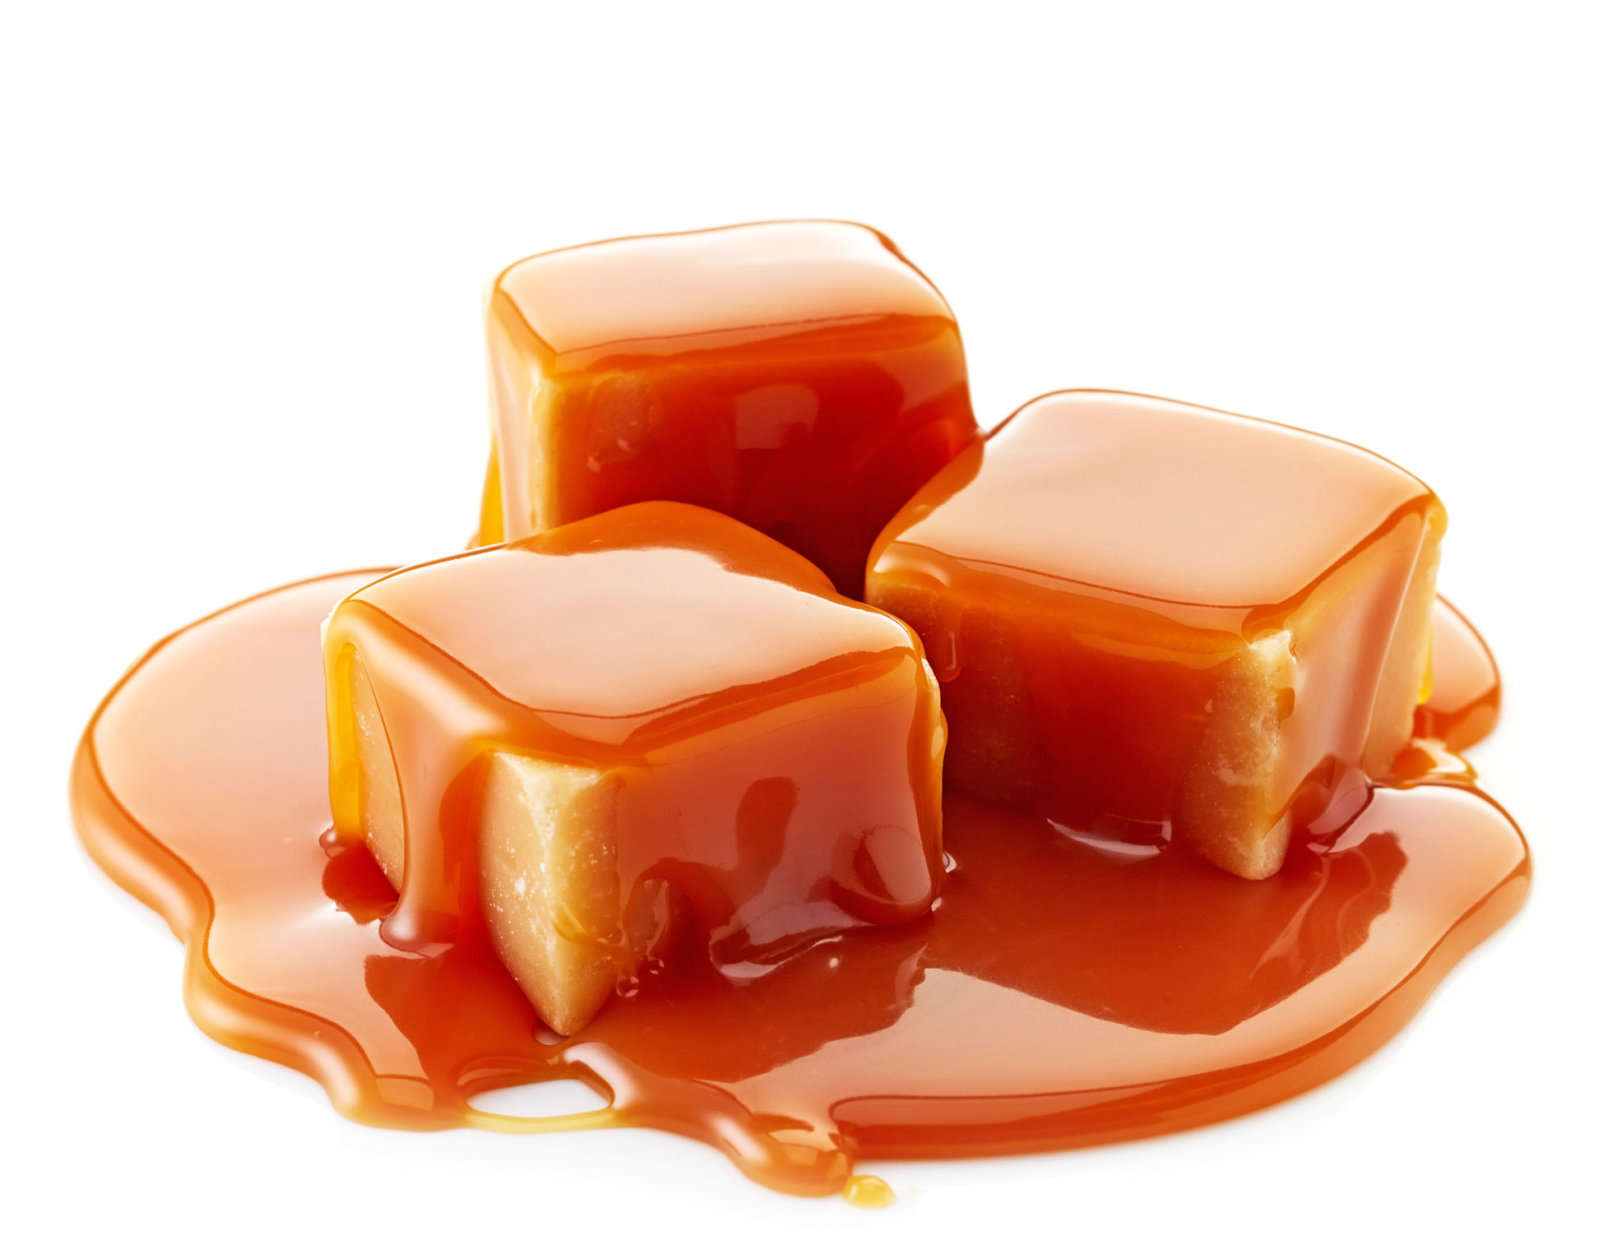 caramel candies and caramel sauce on a white background